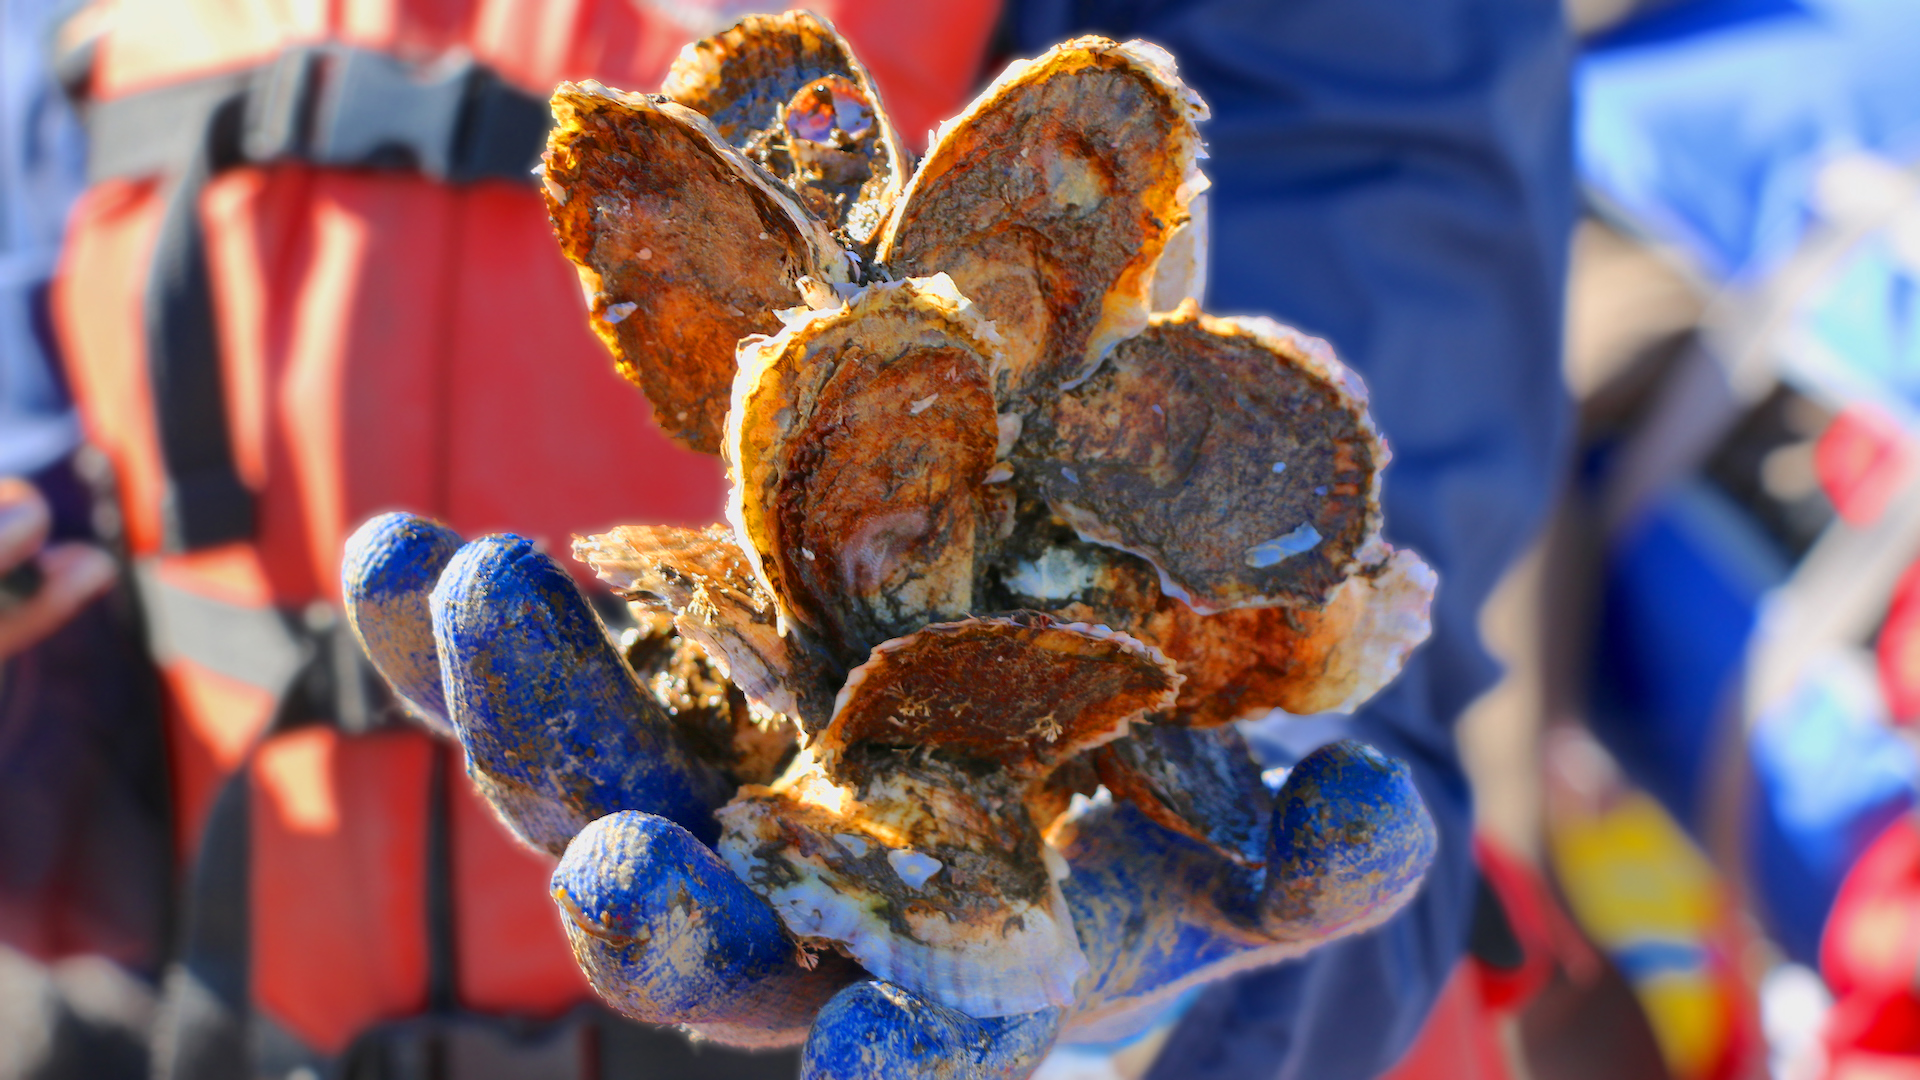 How one billion oysters could protect NYC from the next superstorm